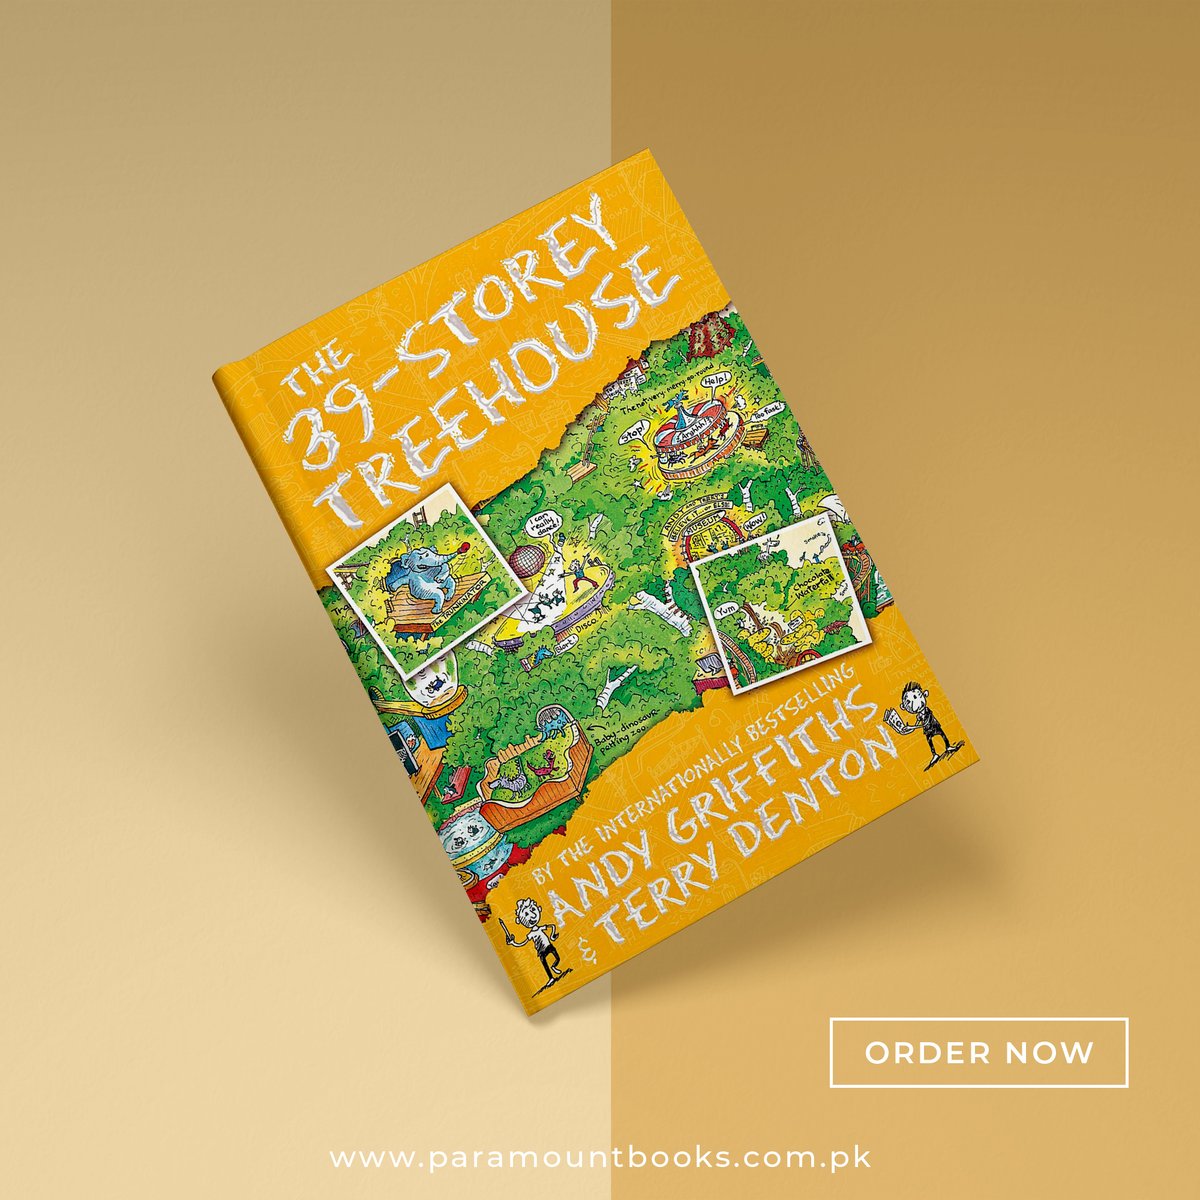 'The 39-storey Tree House' 
For more, Visit: paramountbooks.com.pk/pro.../the-39-…

#39StoreyTreehouse #AndyAndTerry #HilariousRead #ChildrensBooks #AdventureReads #paramountbooks #childrenstorybooks #fiction #kids #kidstime